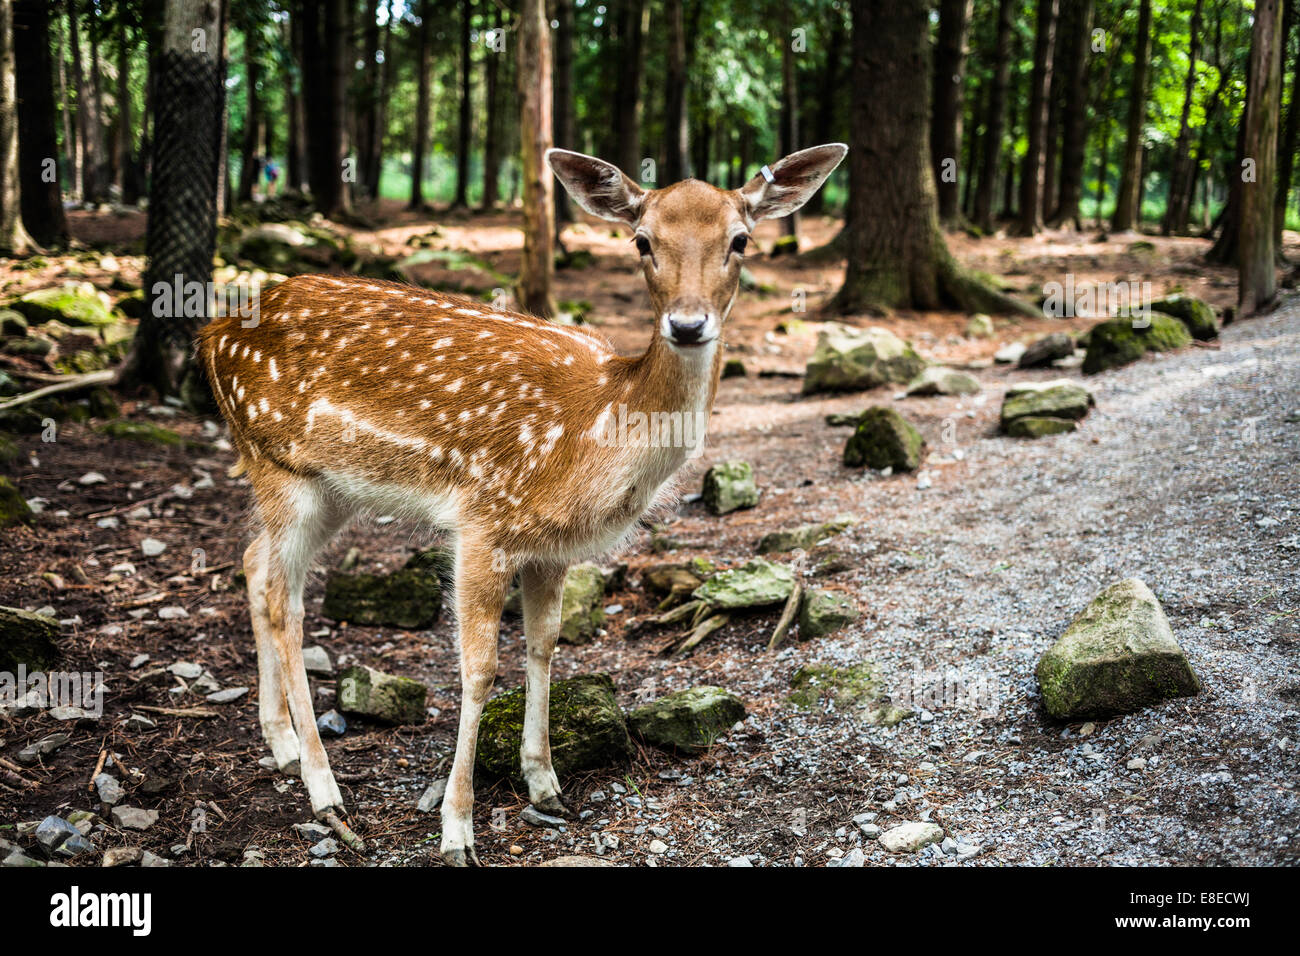 Editorial - July 29, 2014 at the Parc Safari, Quebec , Canada inside the Deer Forest where is is possible to touch or feed the f Stock Photo